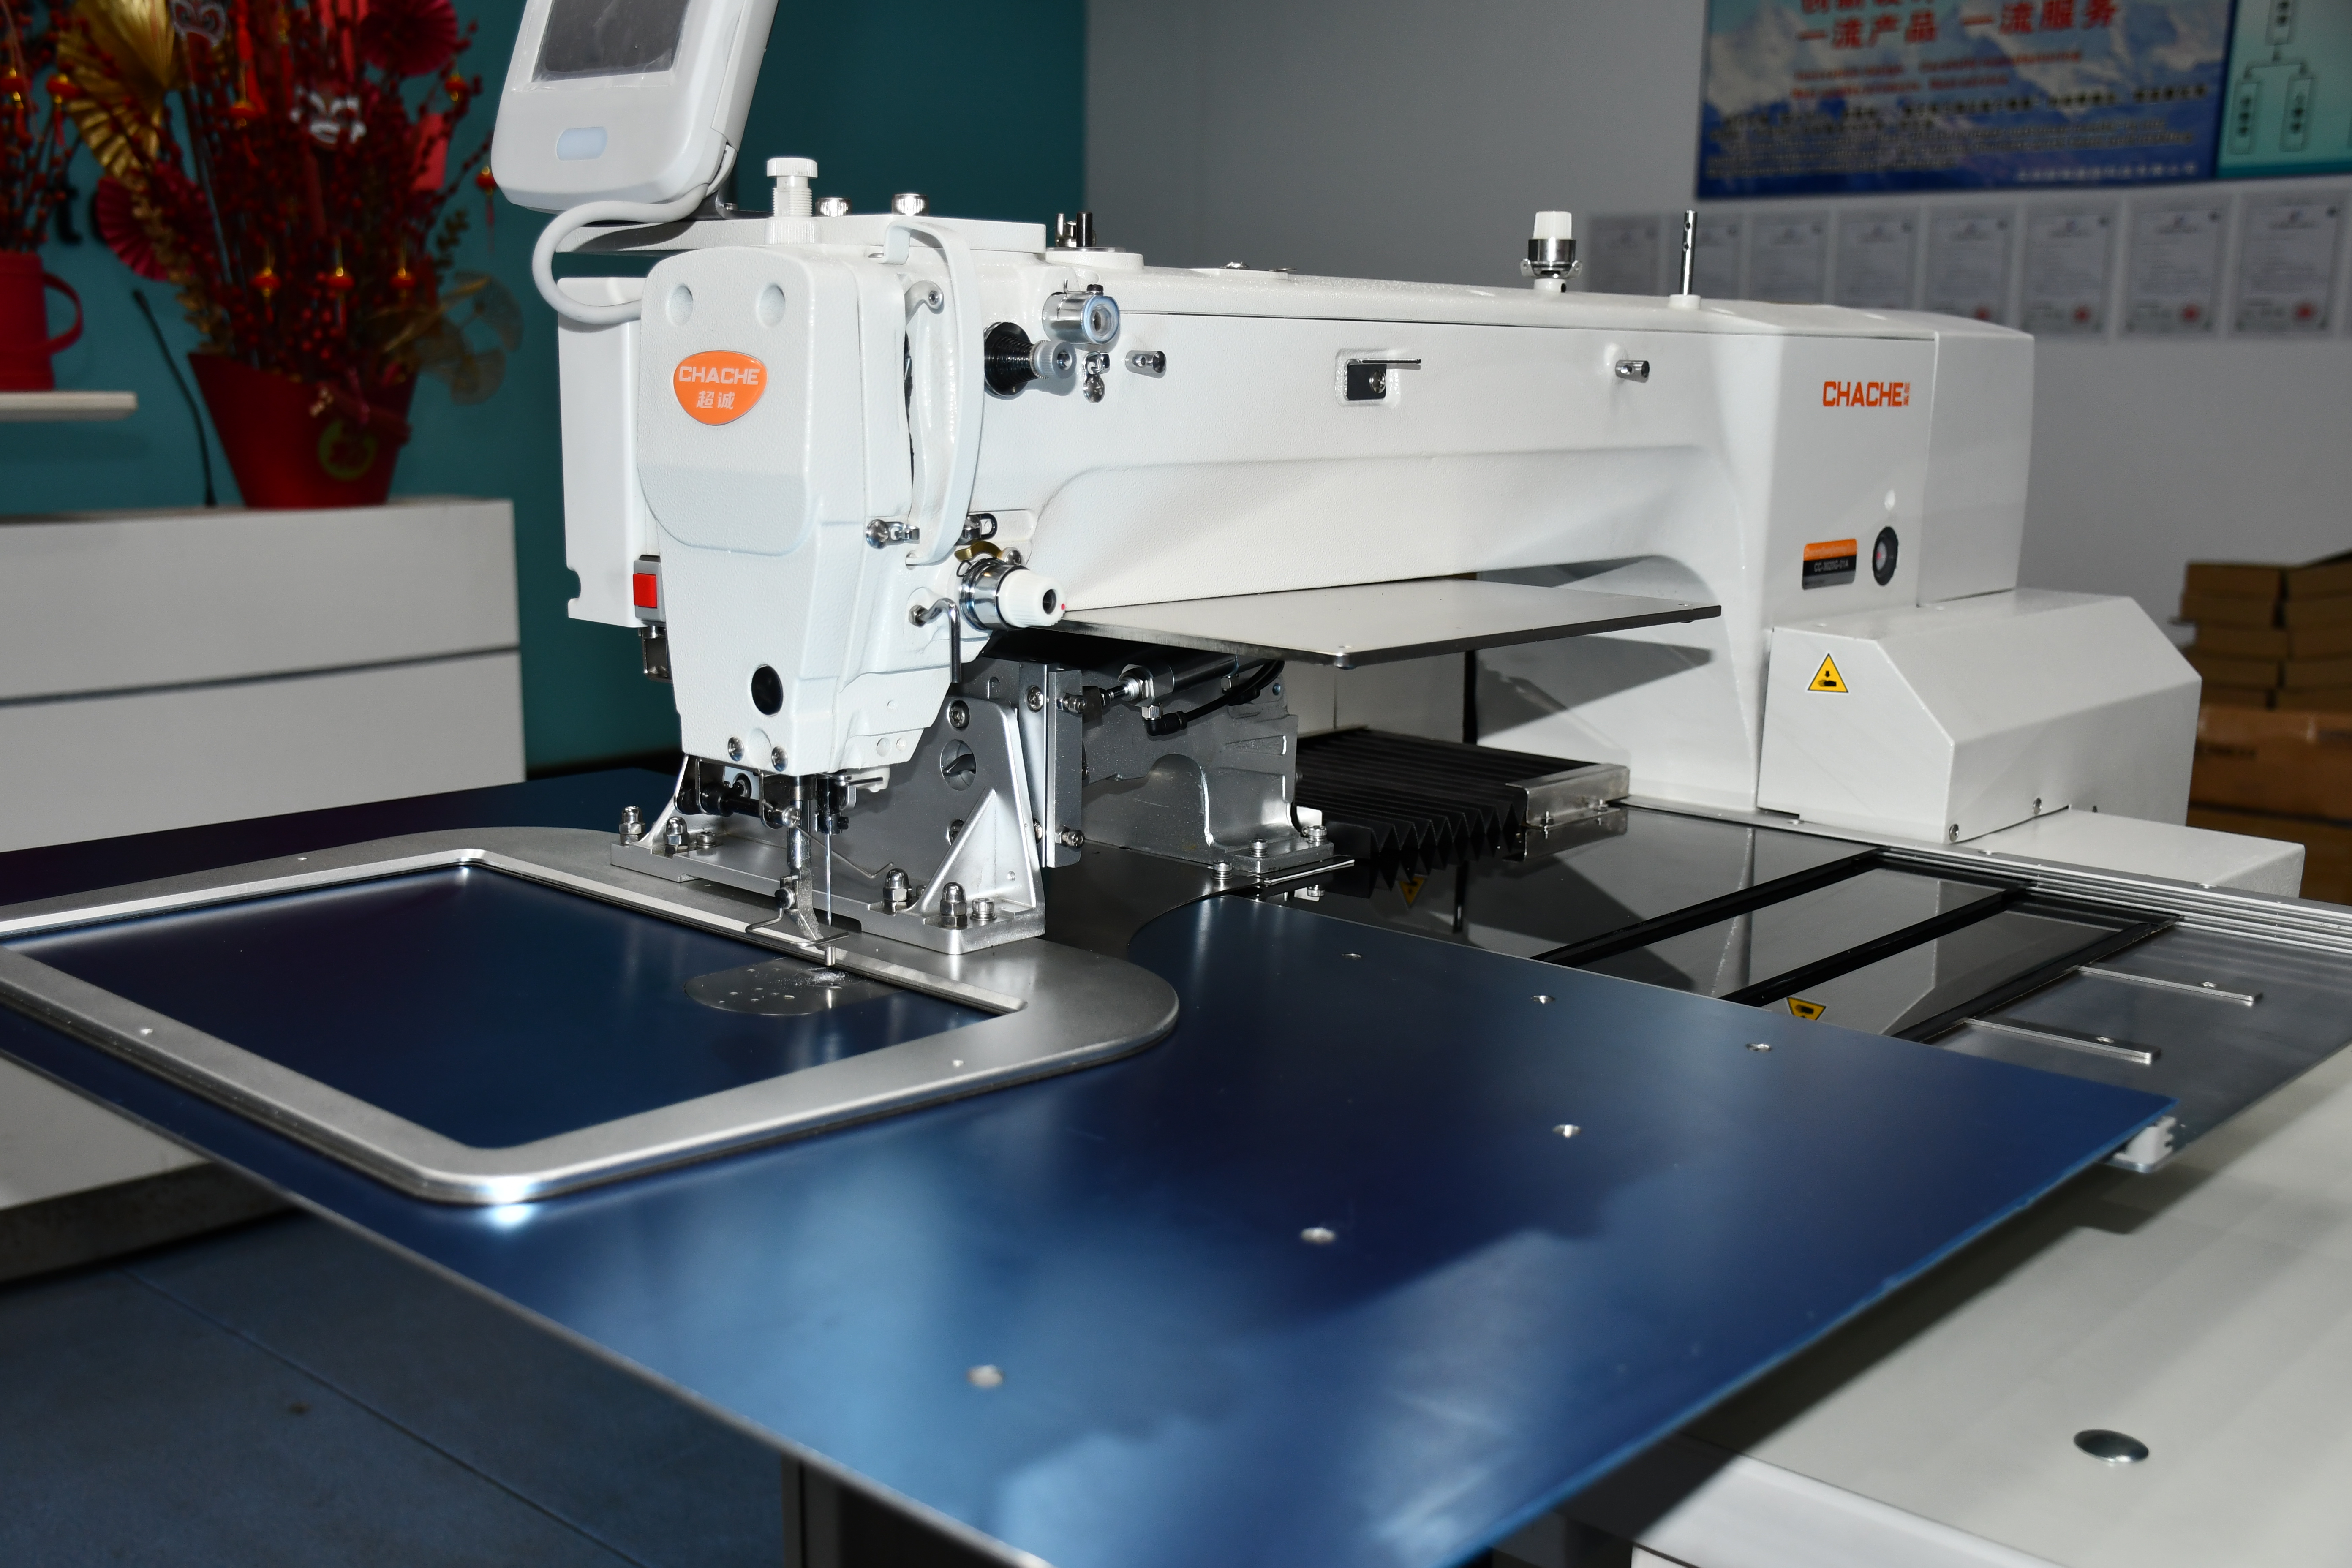 https://www.cn-chache.com/products/computerized-pattern-sewing-machine-cc-3020-3525g-01a/